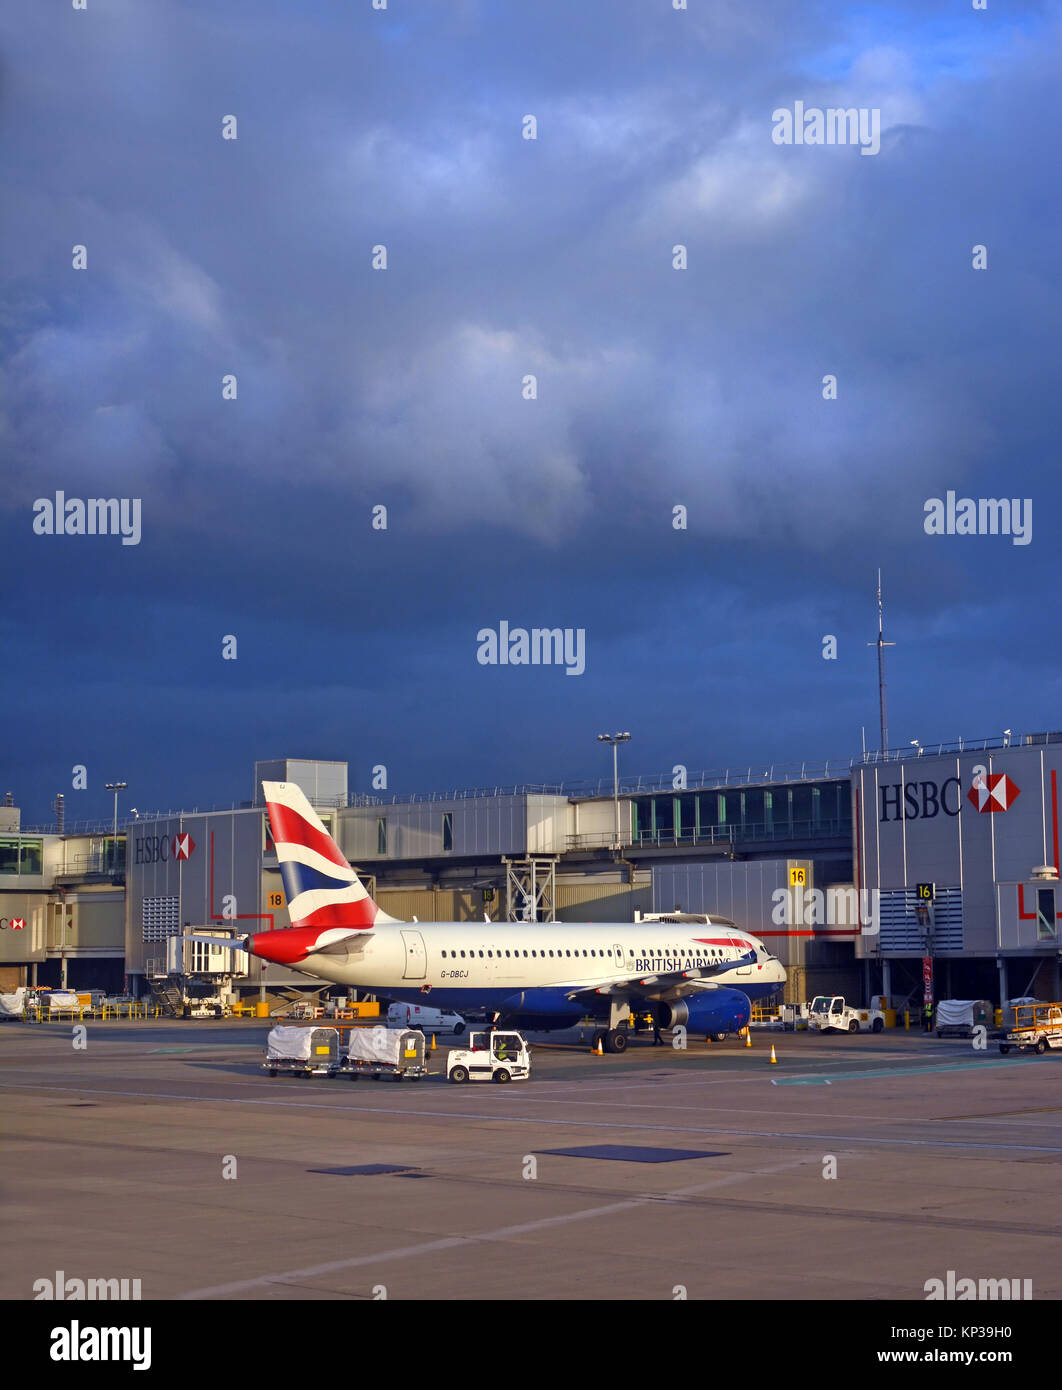 Gatwick, United Kingdon - September 20: 2017: British Airways Jet Airliner being loaded in an Autumn storm at Gatwick Airport. Stock Photo